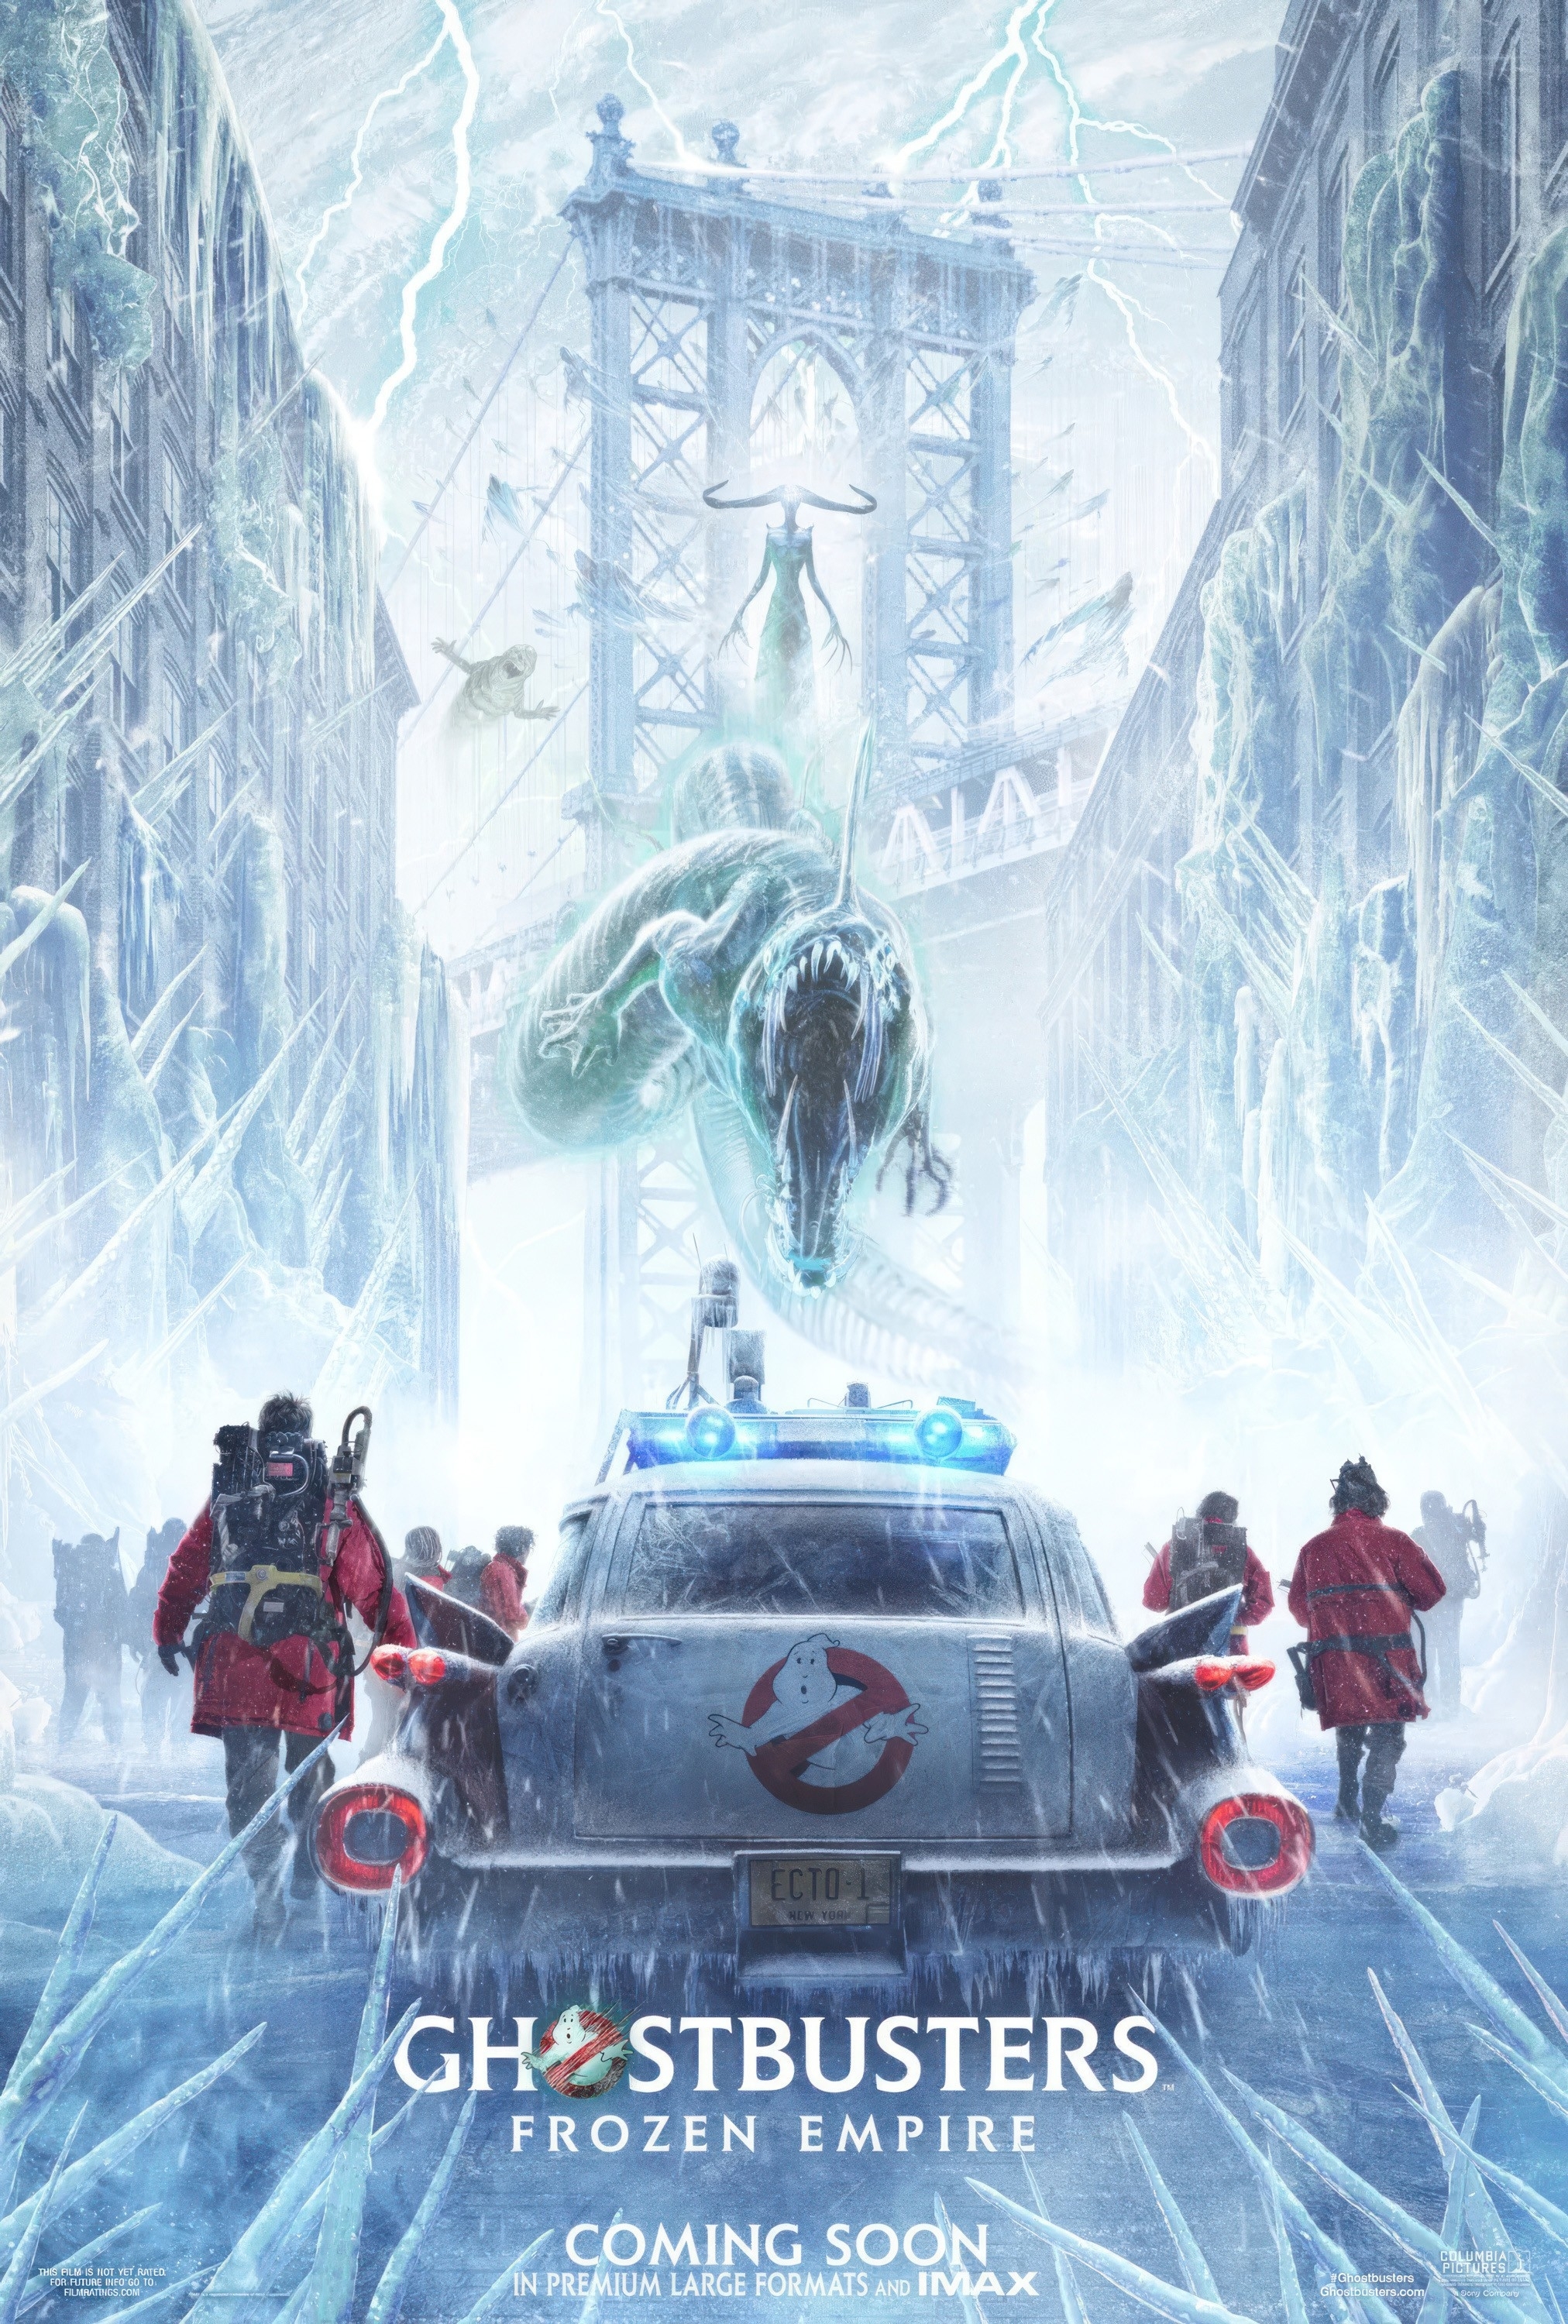 movie poster with the ghostbusters